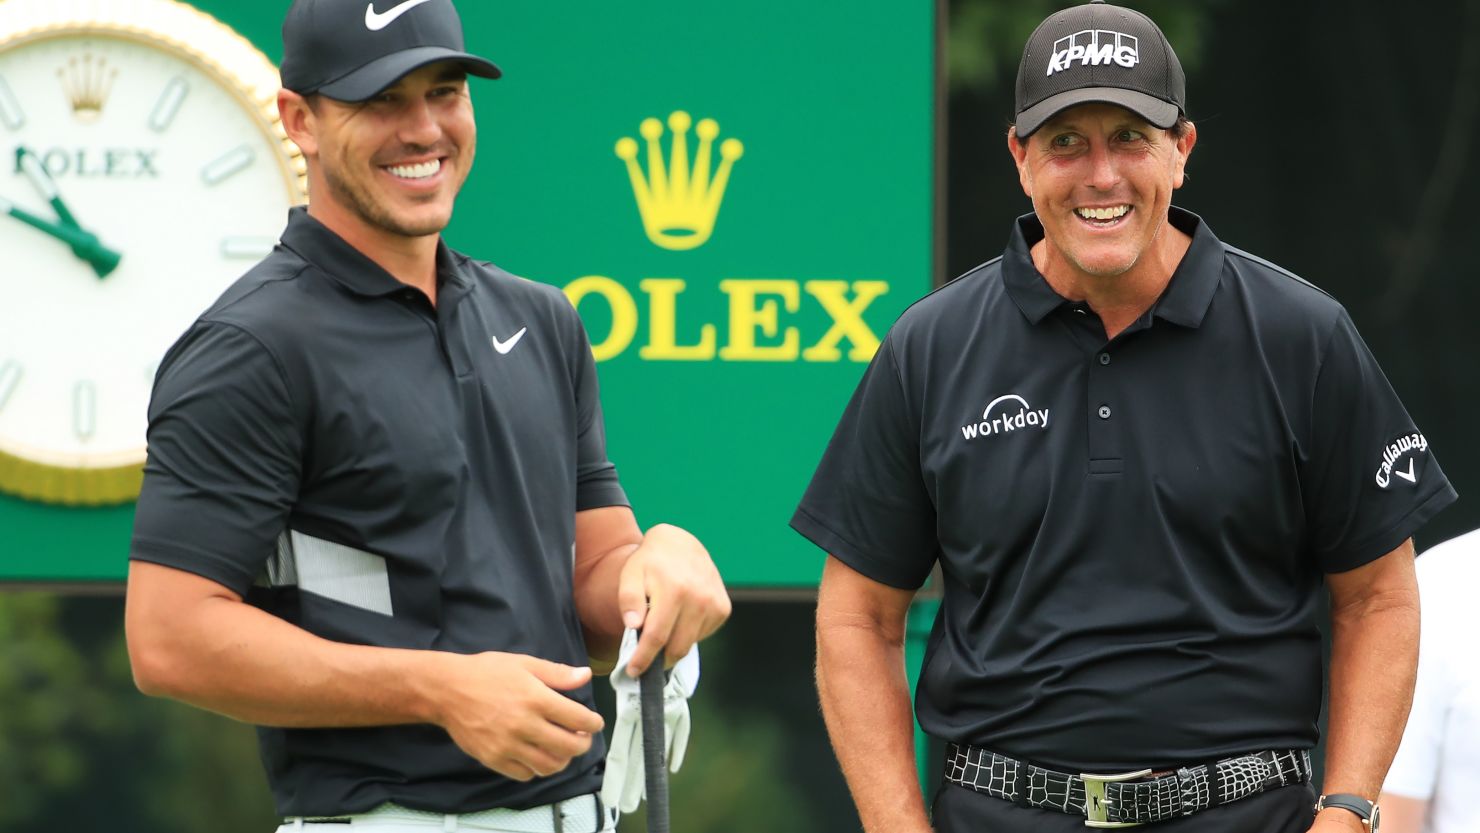 Phil Mickelson played his final round at the BMW Championship with the in-form Brooks Koepka but neither of them threatened the lead in the tournament.